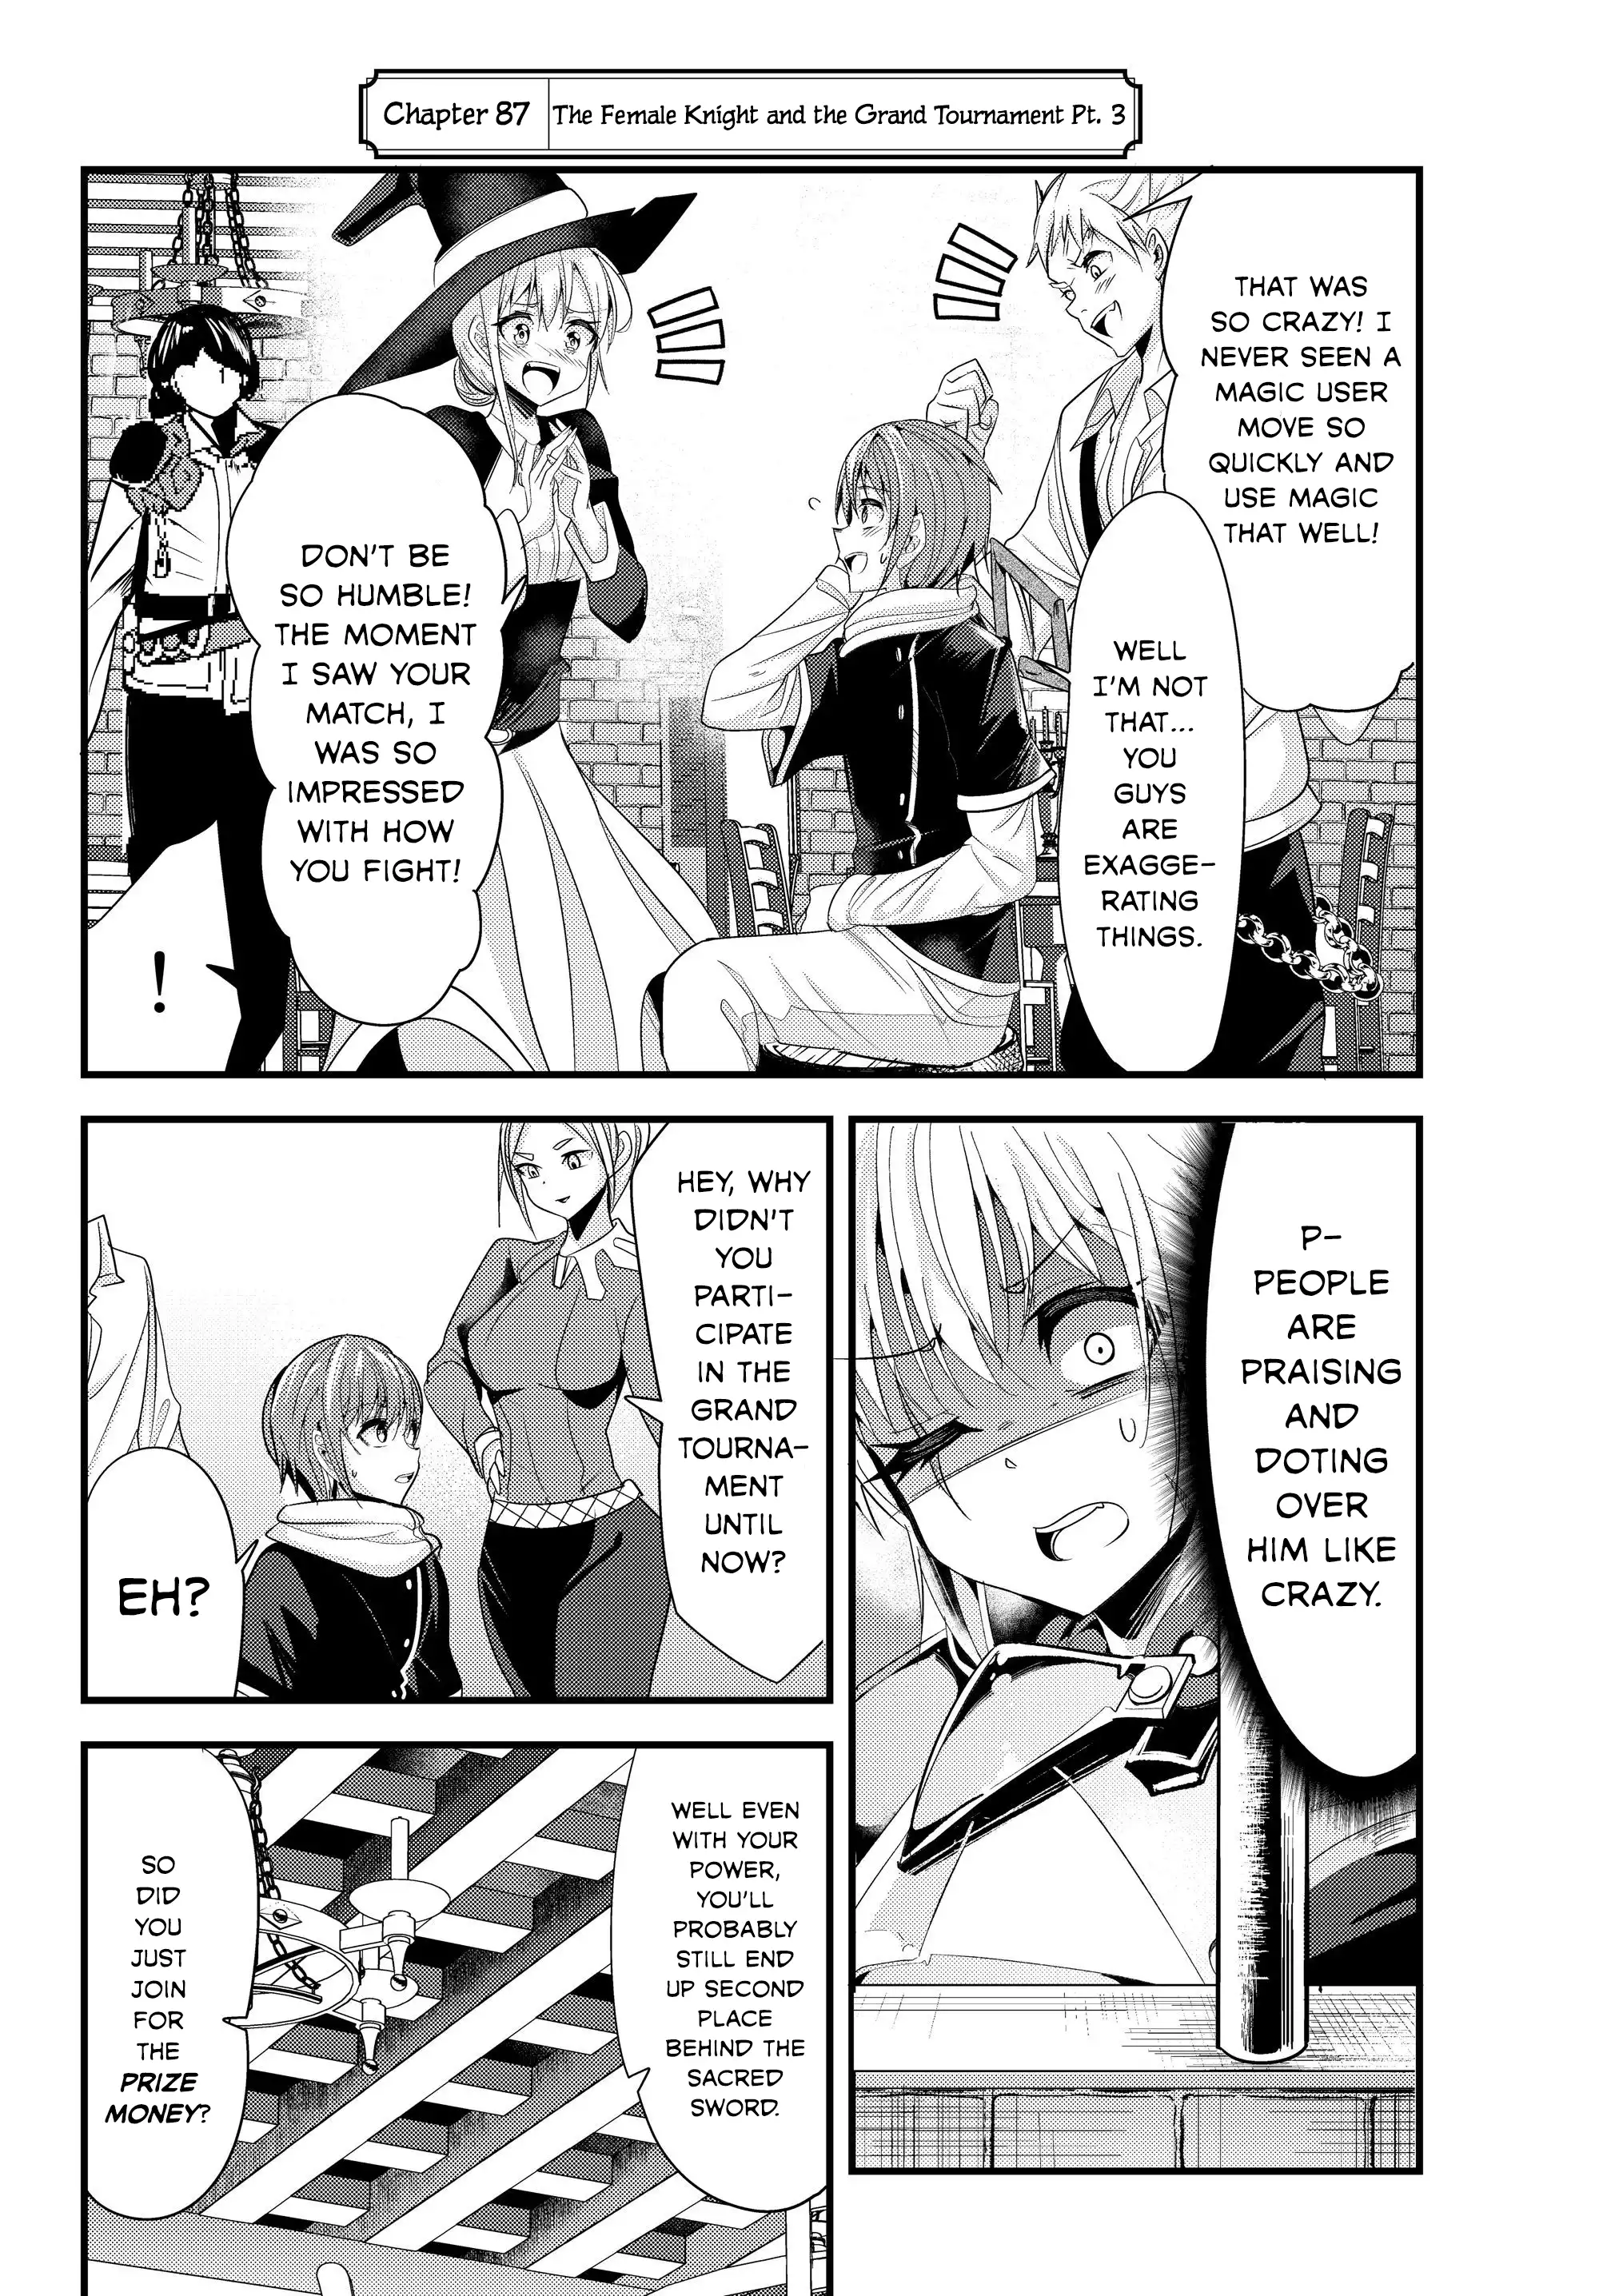 A Story About Treating a Female Knight, Who Has Never Been Treated as a Woman, as a Woman - Chapter 87 Page 2